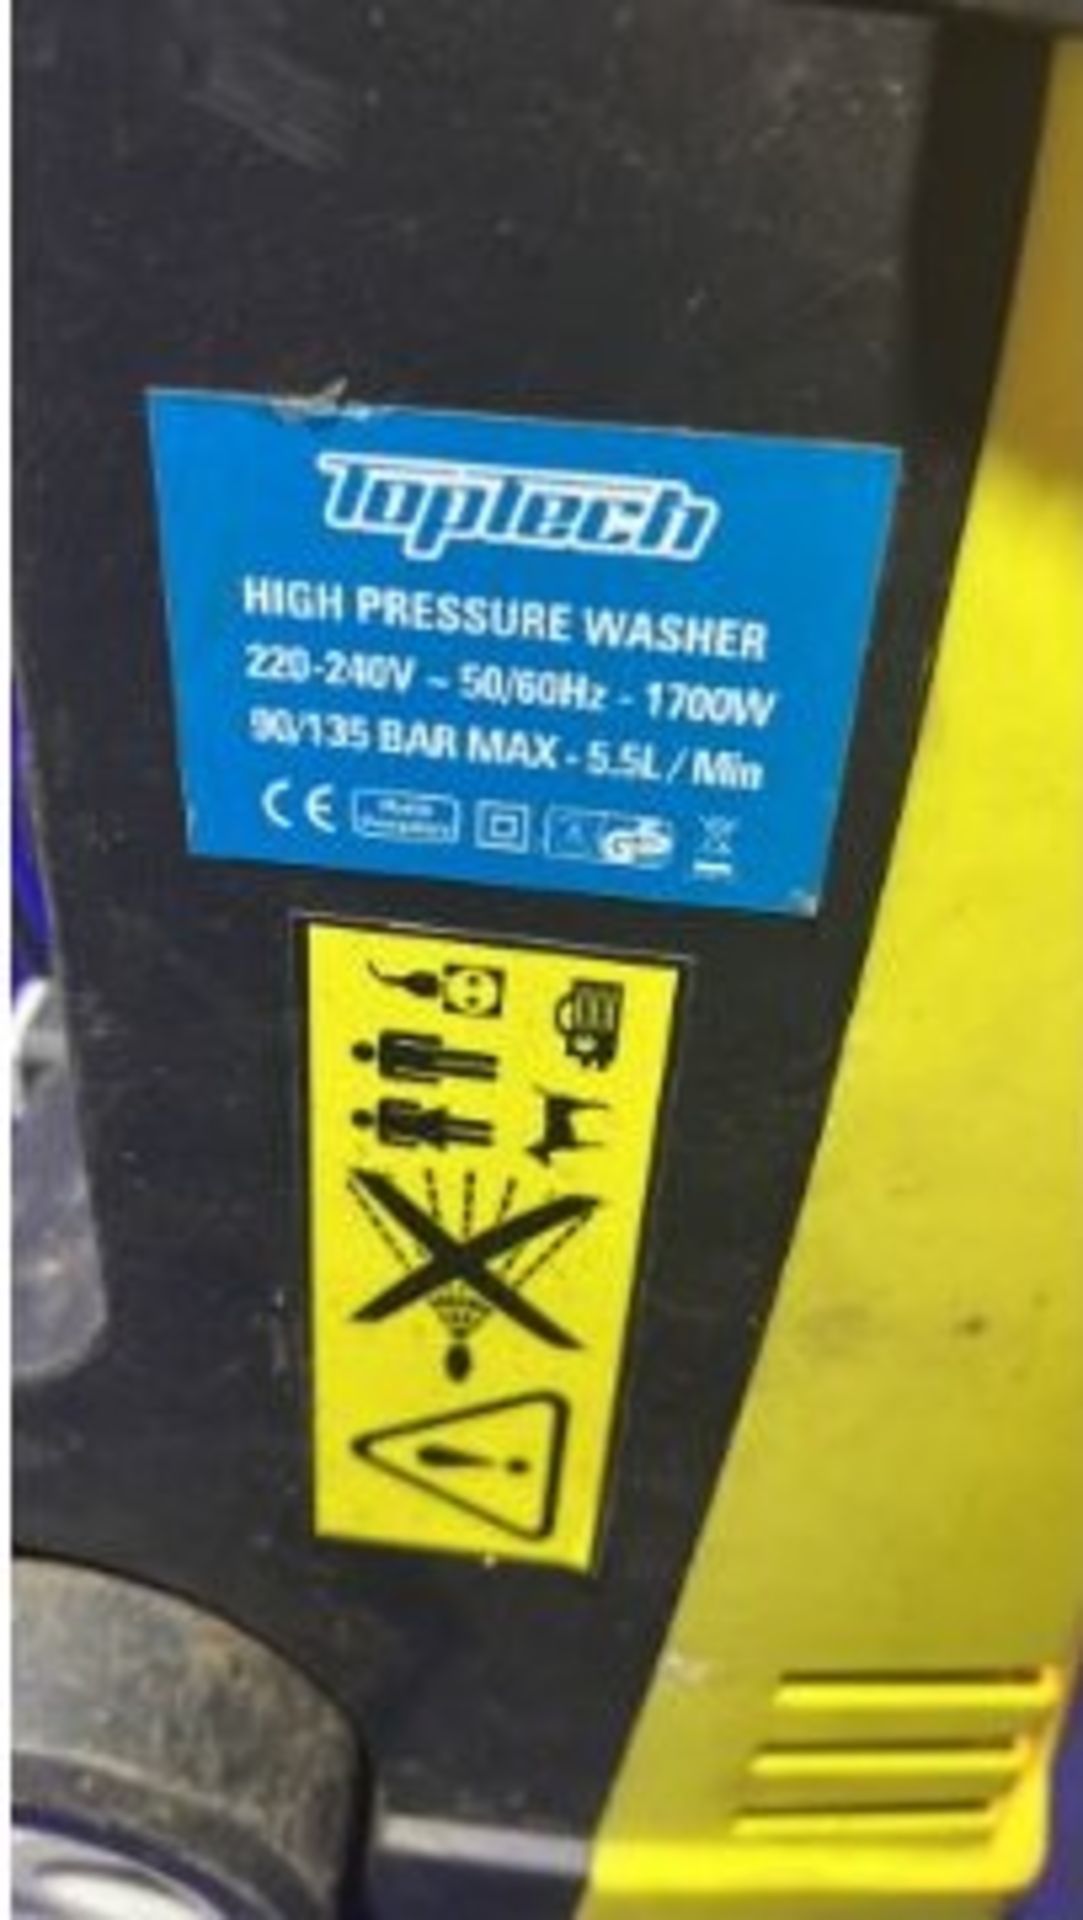 Toptech High Pressure Washer - Image 2 of 3